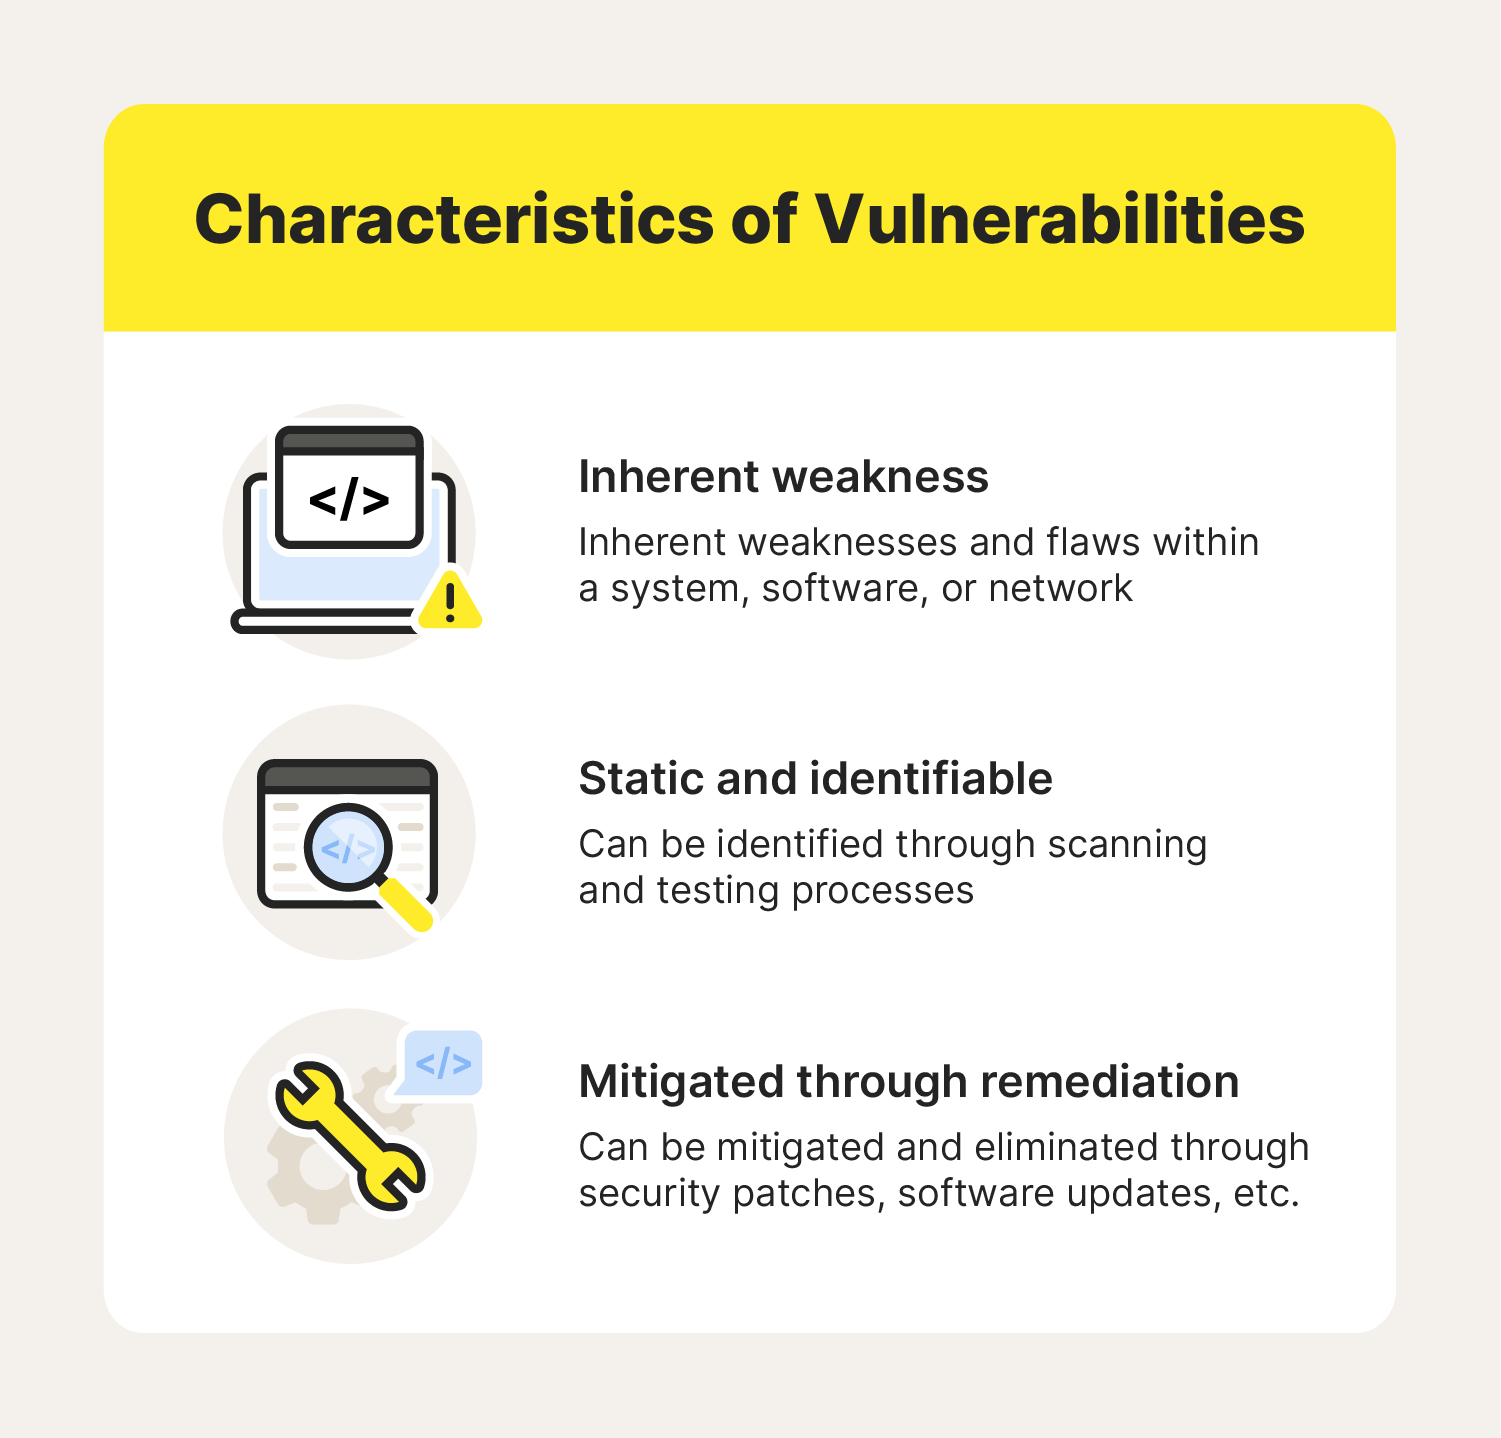 A graphic listing the characteristics of vulnerabilities to educate about attack vectors.